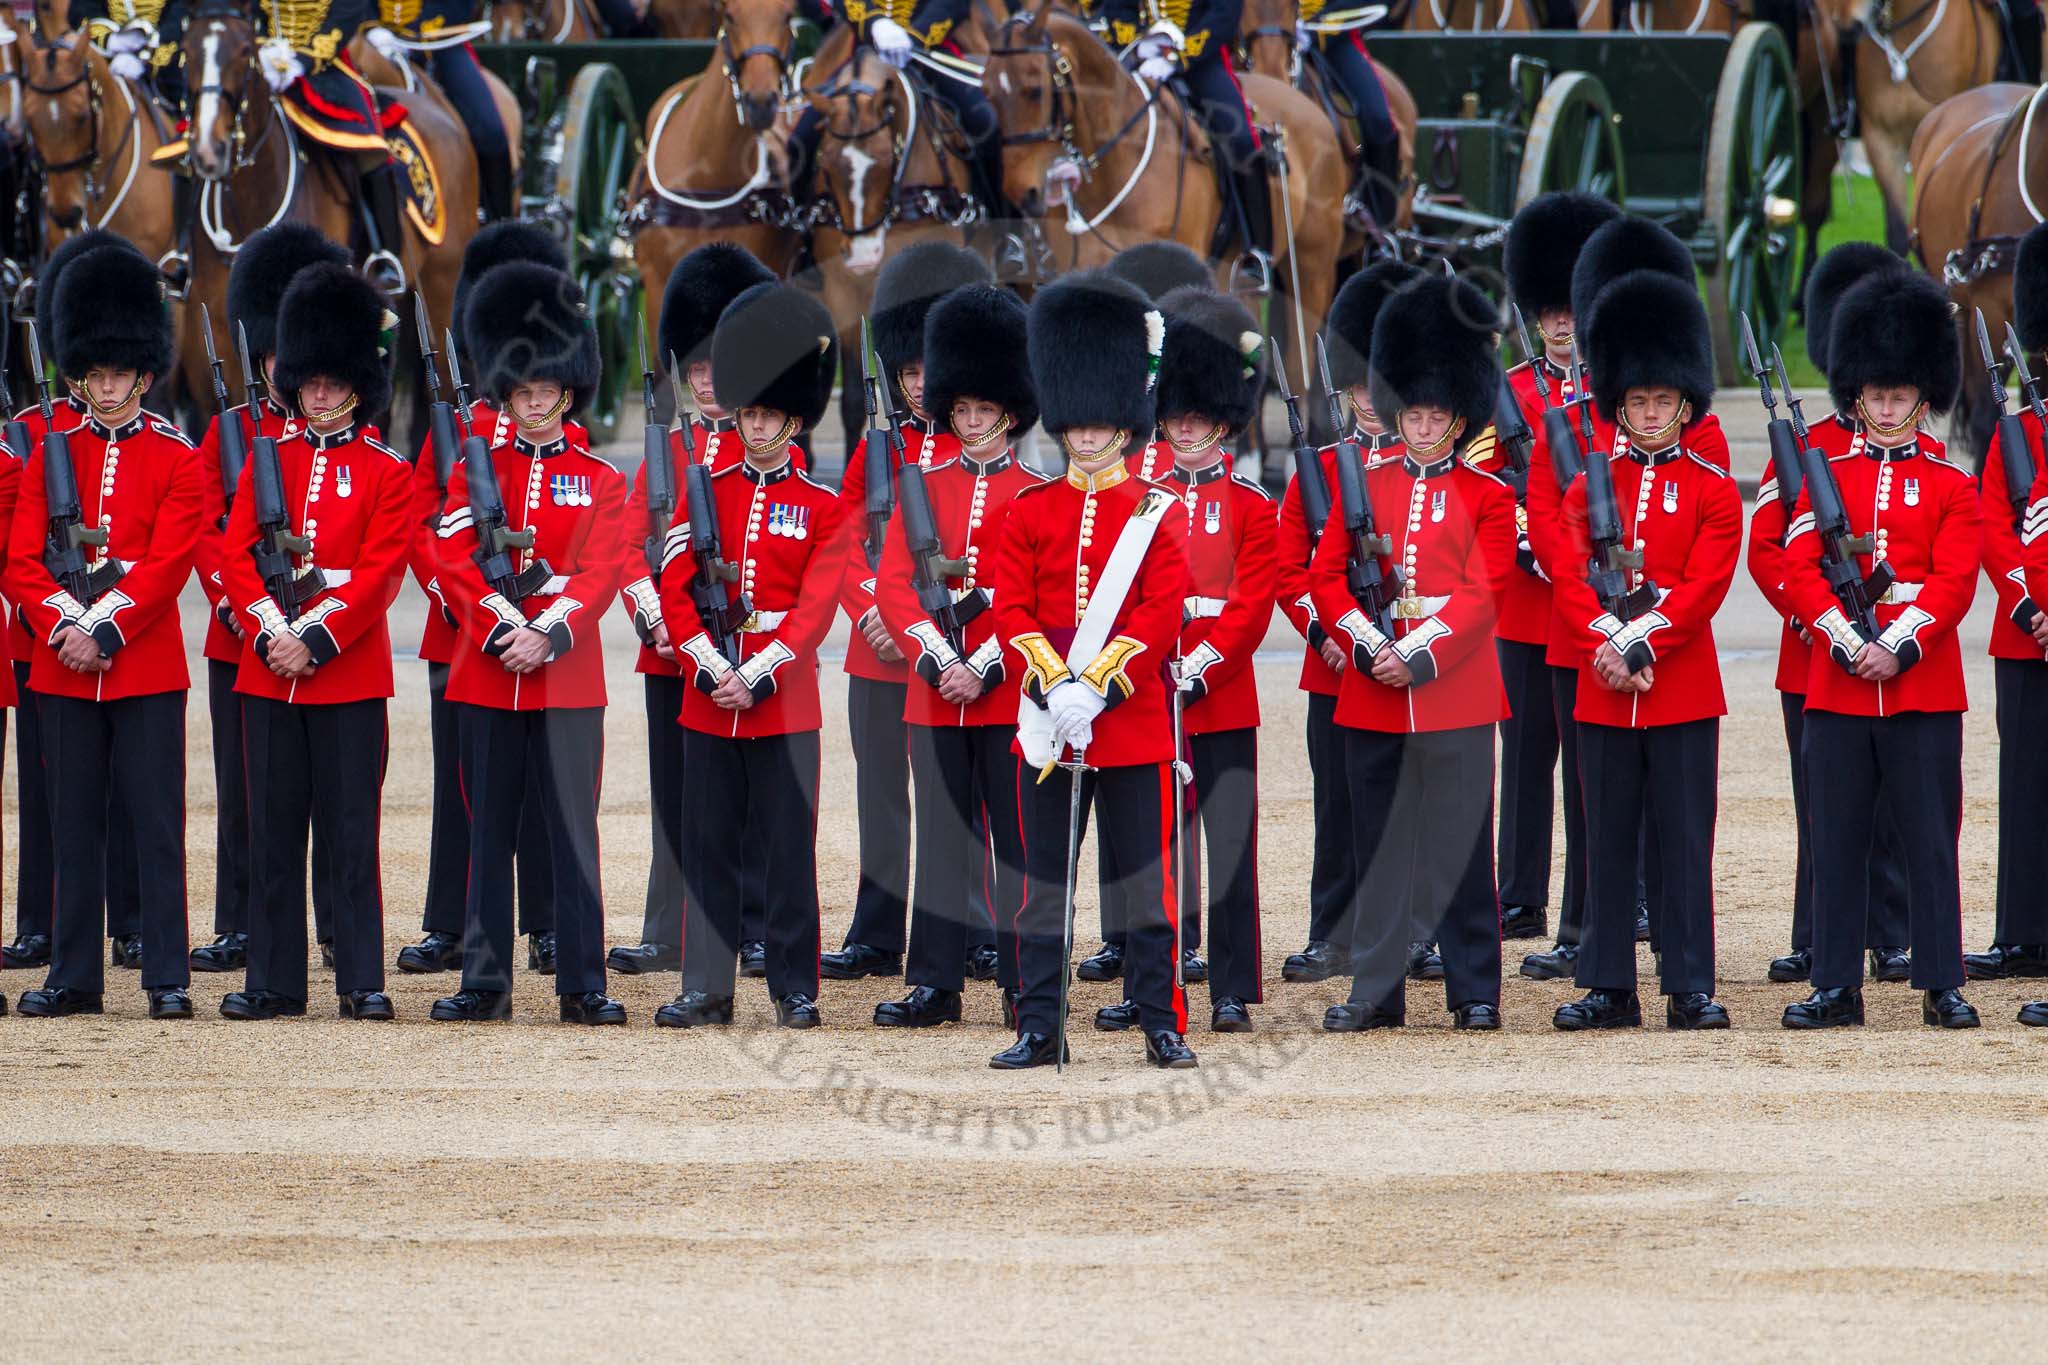 Major General's Review 2013: No. 1 Guard (Escort for the Colour),1st Battalion Welsh Guards, with the Ensign,Second Lieutenant Joel Dinwiddle in the centre, the King's Troop Royal Horse Artillery behind..
Horse Guards Parade, Westminster,
London SW1,

United Kingdom,
on 01 June 2013 at 10:46, image #192